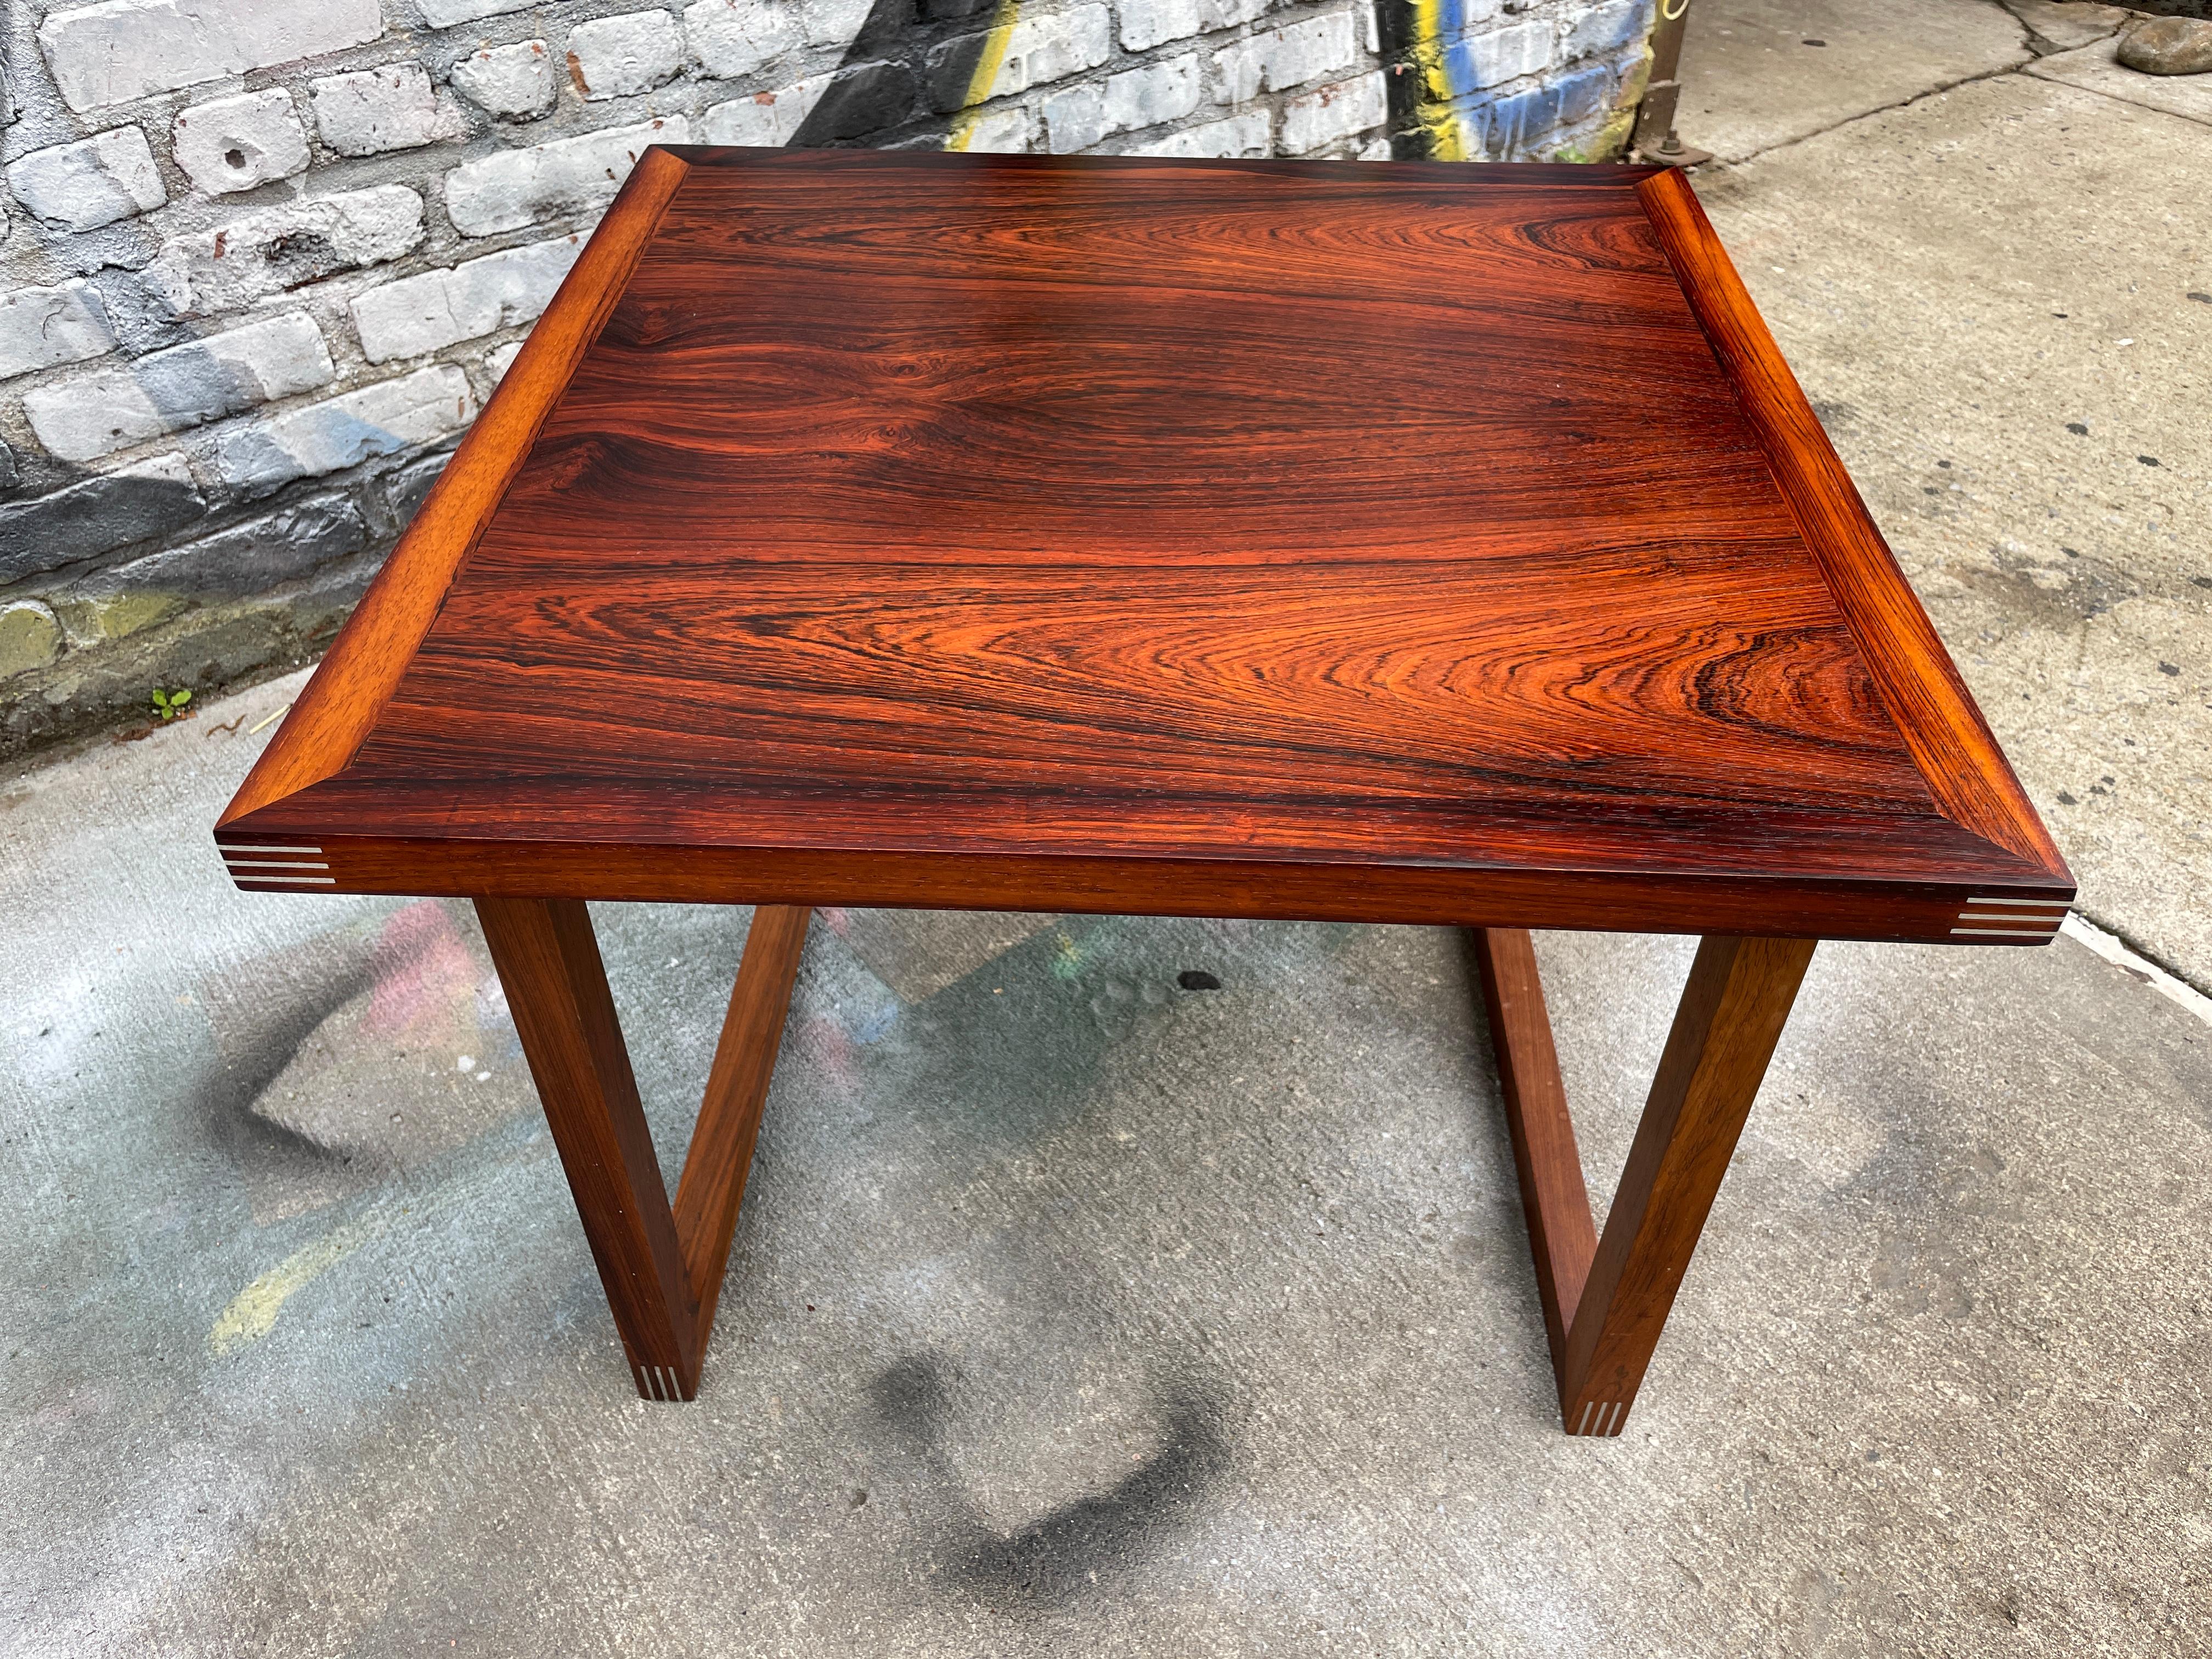 Beautiful Solid rosewood side table table. Amazing aluminum jointery on all joints very sturdy and great design. Rosewood Rud Thygesen for Heltborg Mobler Danish Modern Coffee Table,
Located in Brooklyn NYC. No Labels or MFG